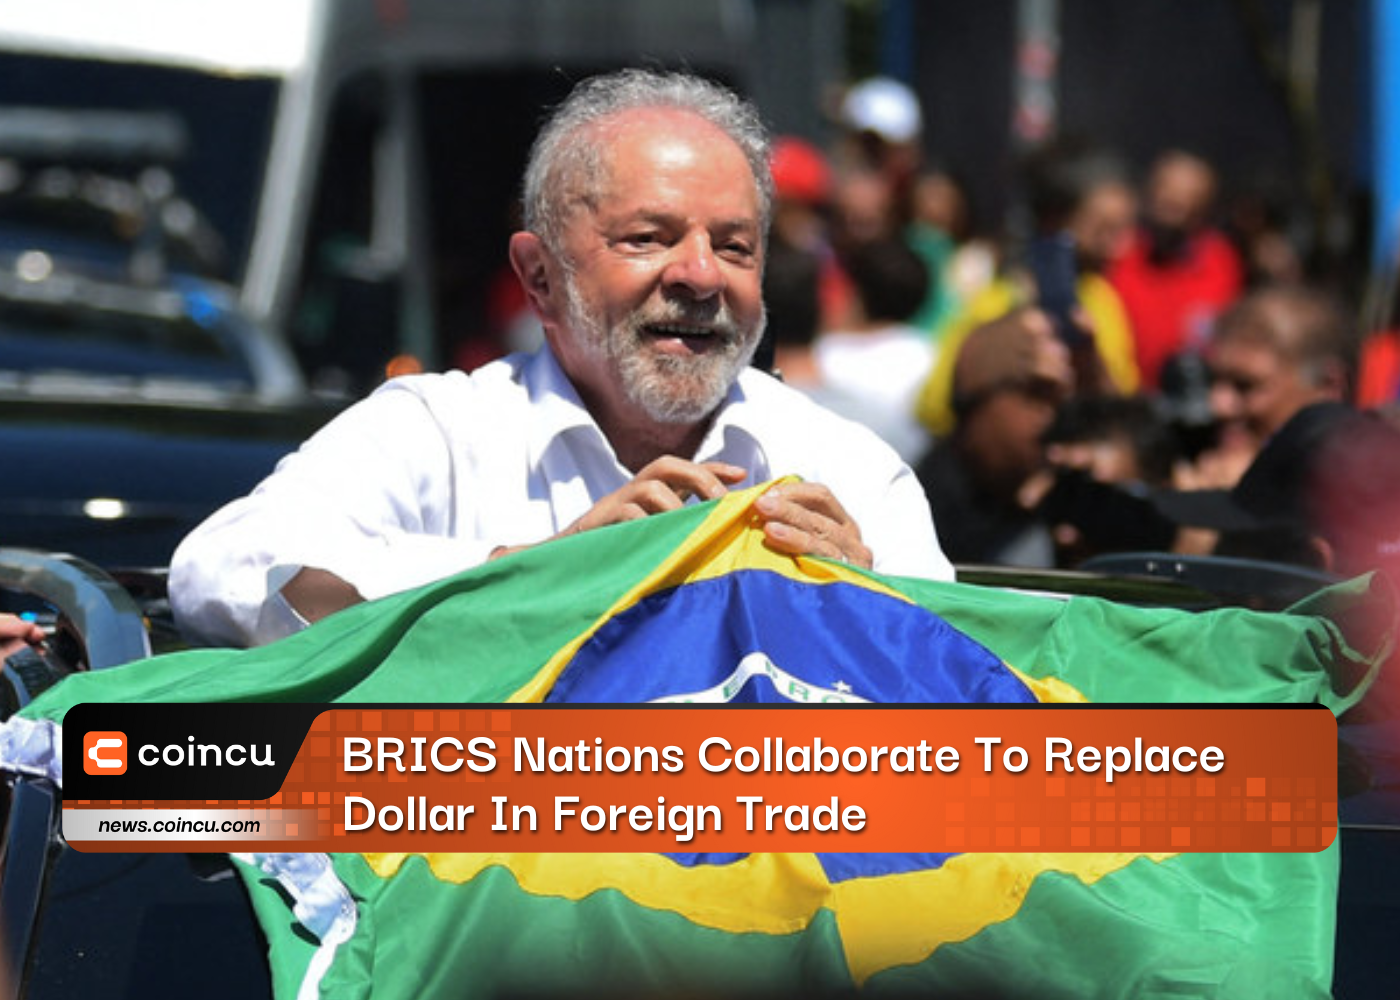 BRICS Nations Collaborate To Replace Dollar In Foreign Trade